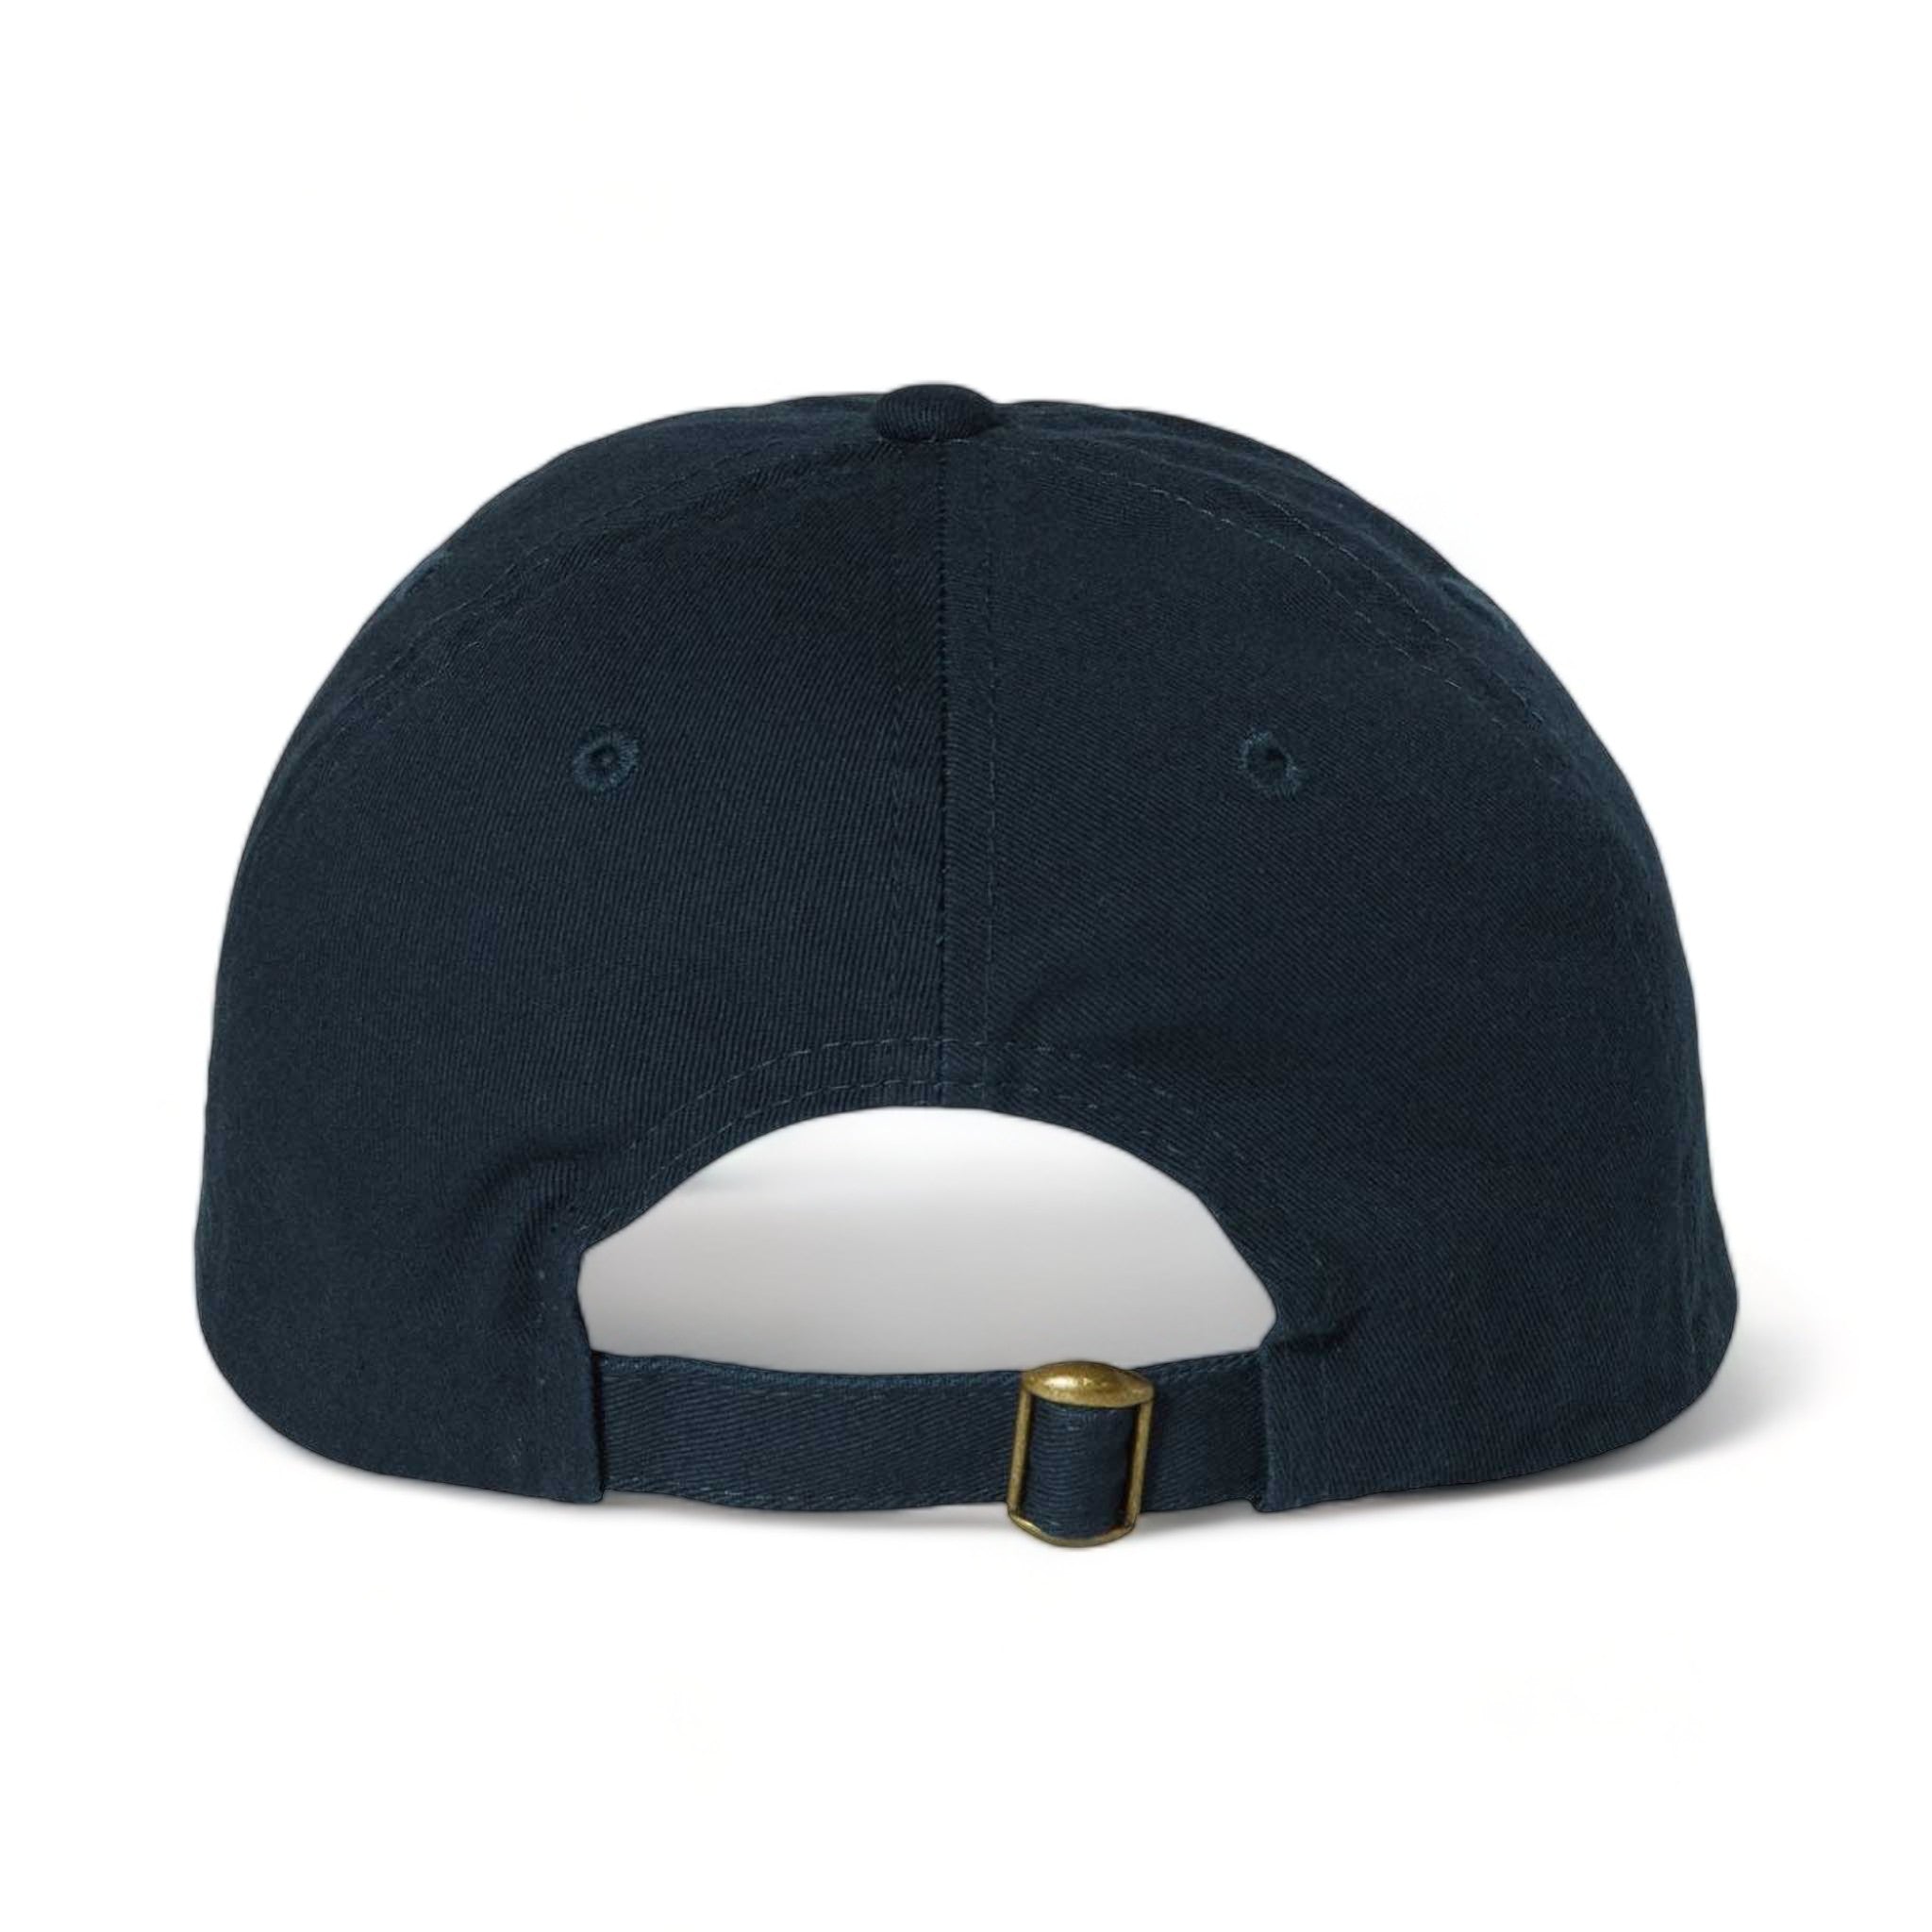 Back view of Valucap VC300A custom hat in navy